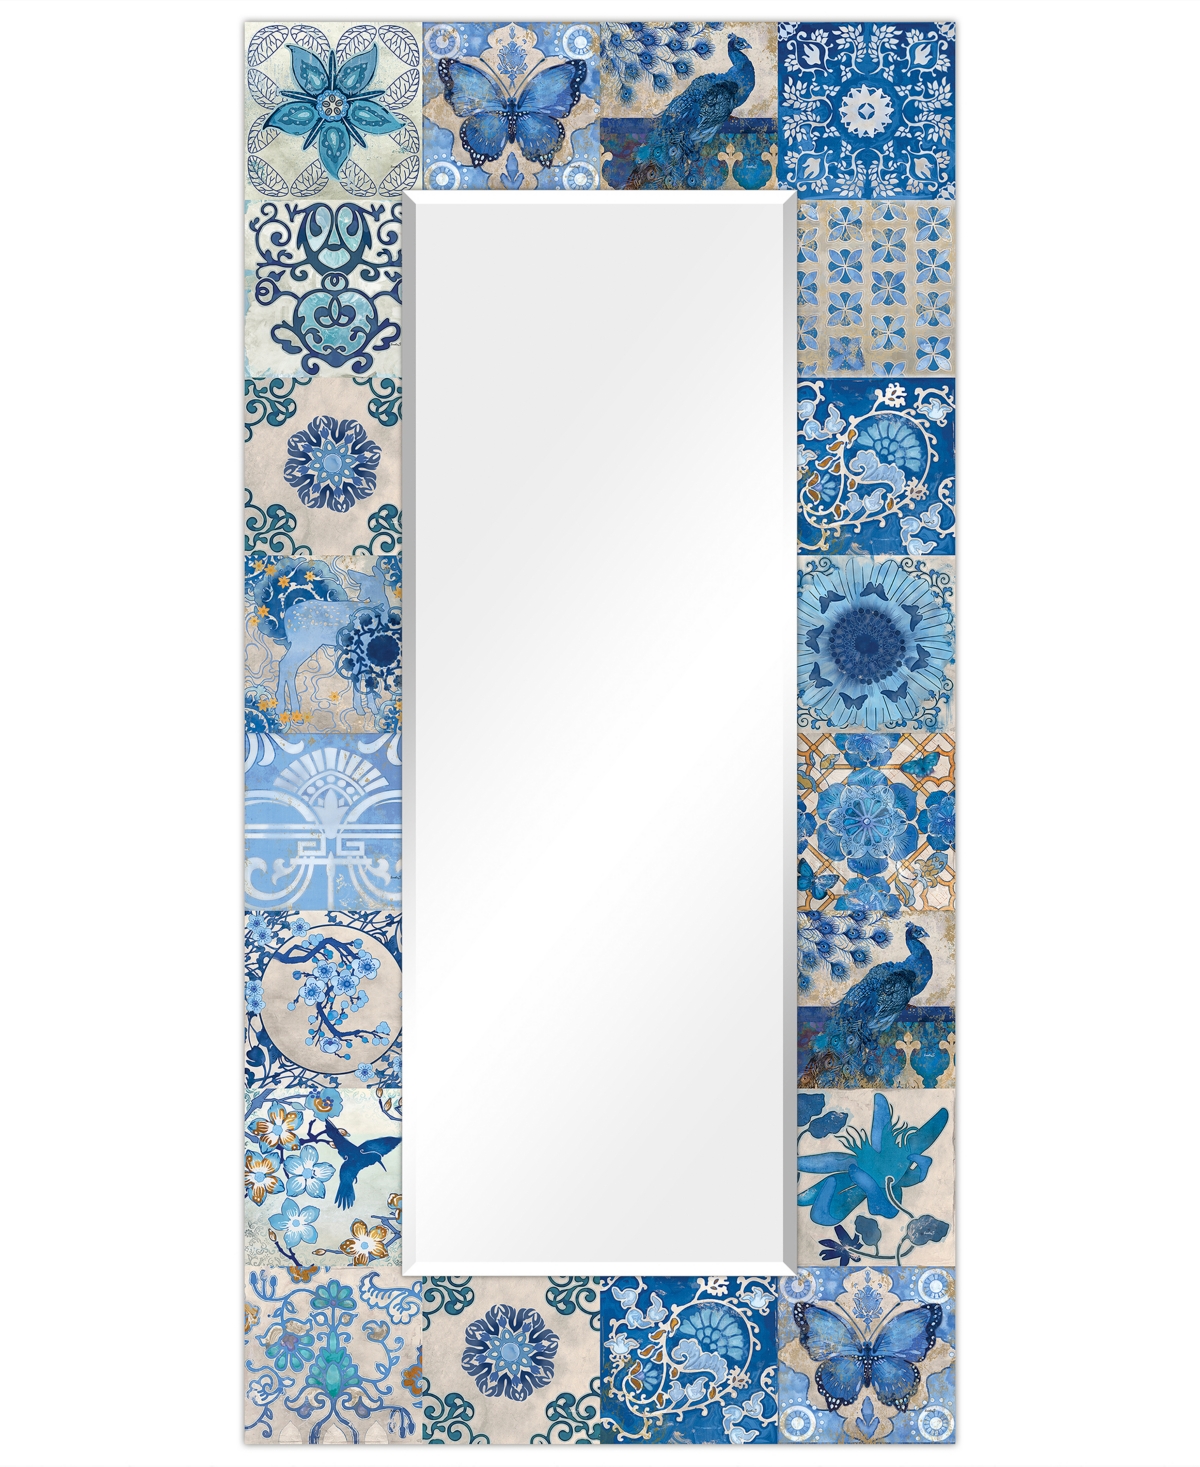 'Tiles' Rectangular On Free Floating Printed Tempered Art Glass Beveled Mirror, 72" x 36" - Multicolor